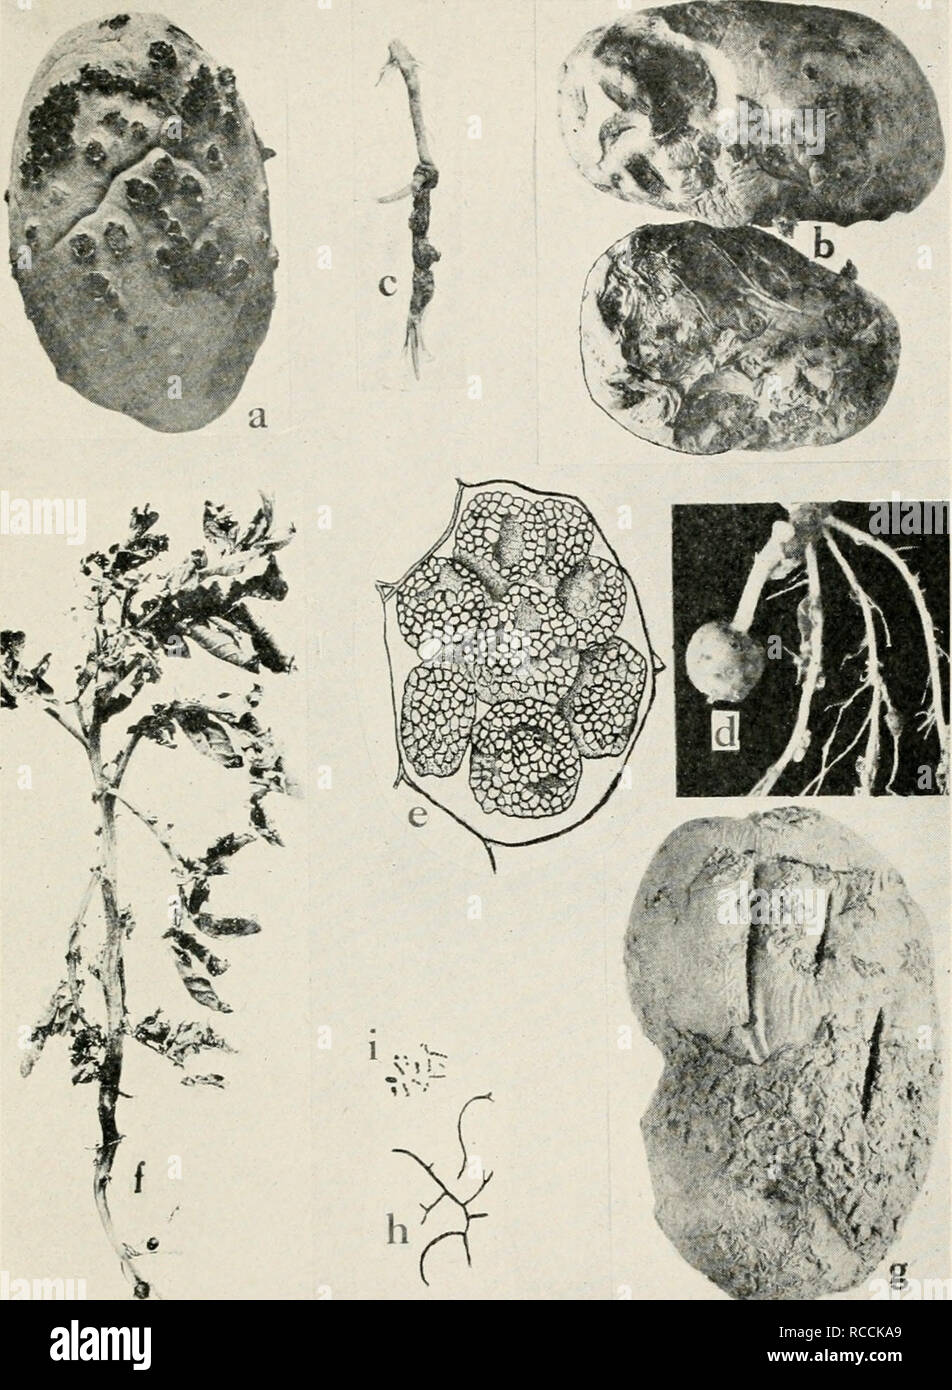 . Diseases of truck crops and their control. Plants -- Diseases. Fig. 59. Diseases of the Potato. a. Powdery scab, early stage, 6. powdery scab, advanced stage of rotting, c. and d. powdery scab, gall-forming stage on potato roots {c. and d. after Melhus and Rosen- baum), e. single potato cell showing spore balls of the powdery scab fungus (after Melhus),/.black leg, g. common scab, h. to i. drawings of the organism of common scab, showing branching of threads and groups of spores or conidia (after Lutman and Cunningham).. Please note that these images are extracted from scanned page images th Stock Photo